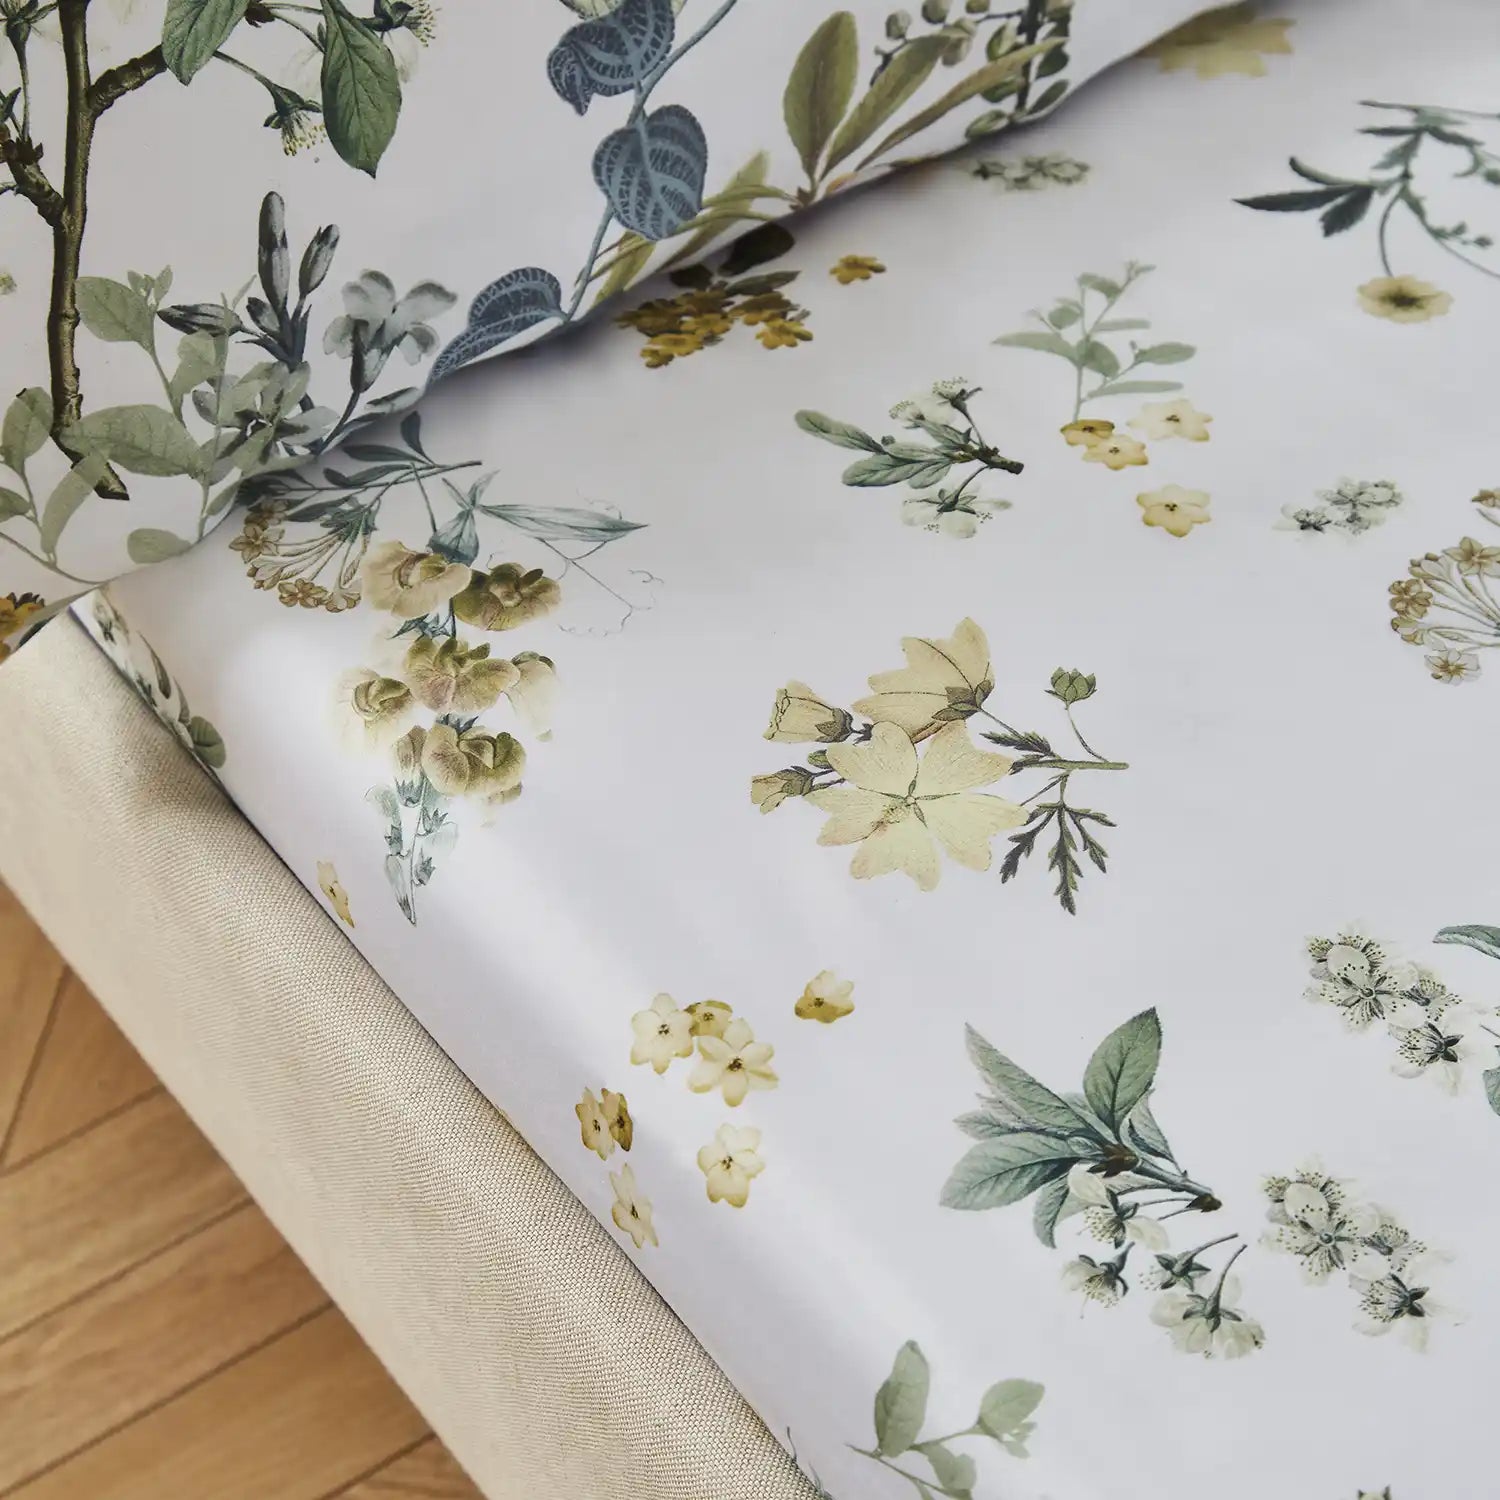 Dorma Tabitha Floral 100% Cotton Fitted Sheet - White/Floral 1 Shaws Department Stores